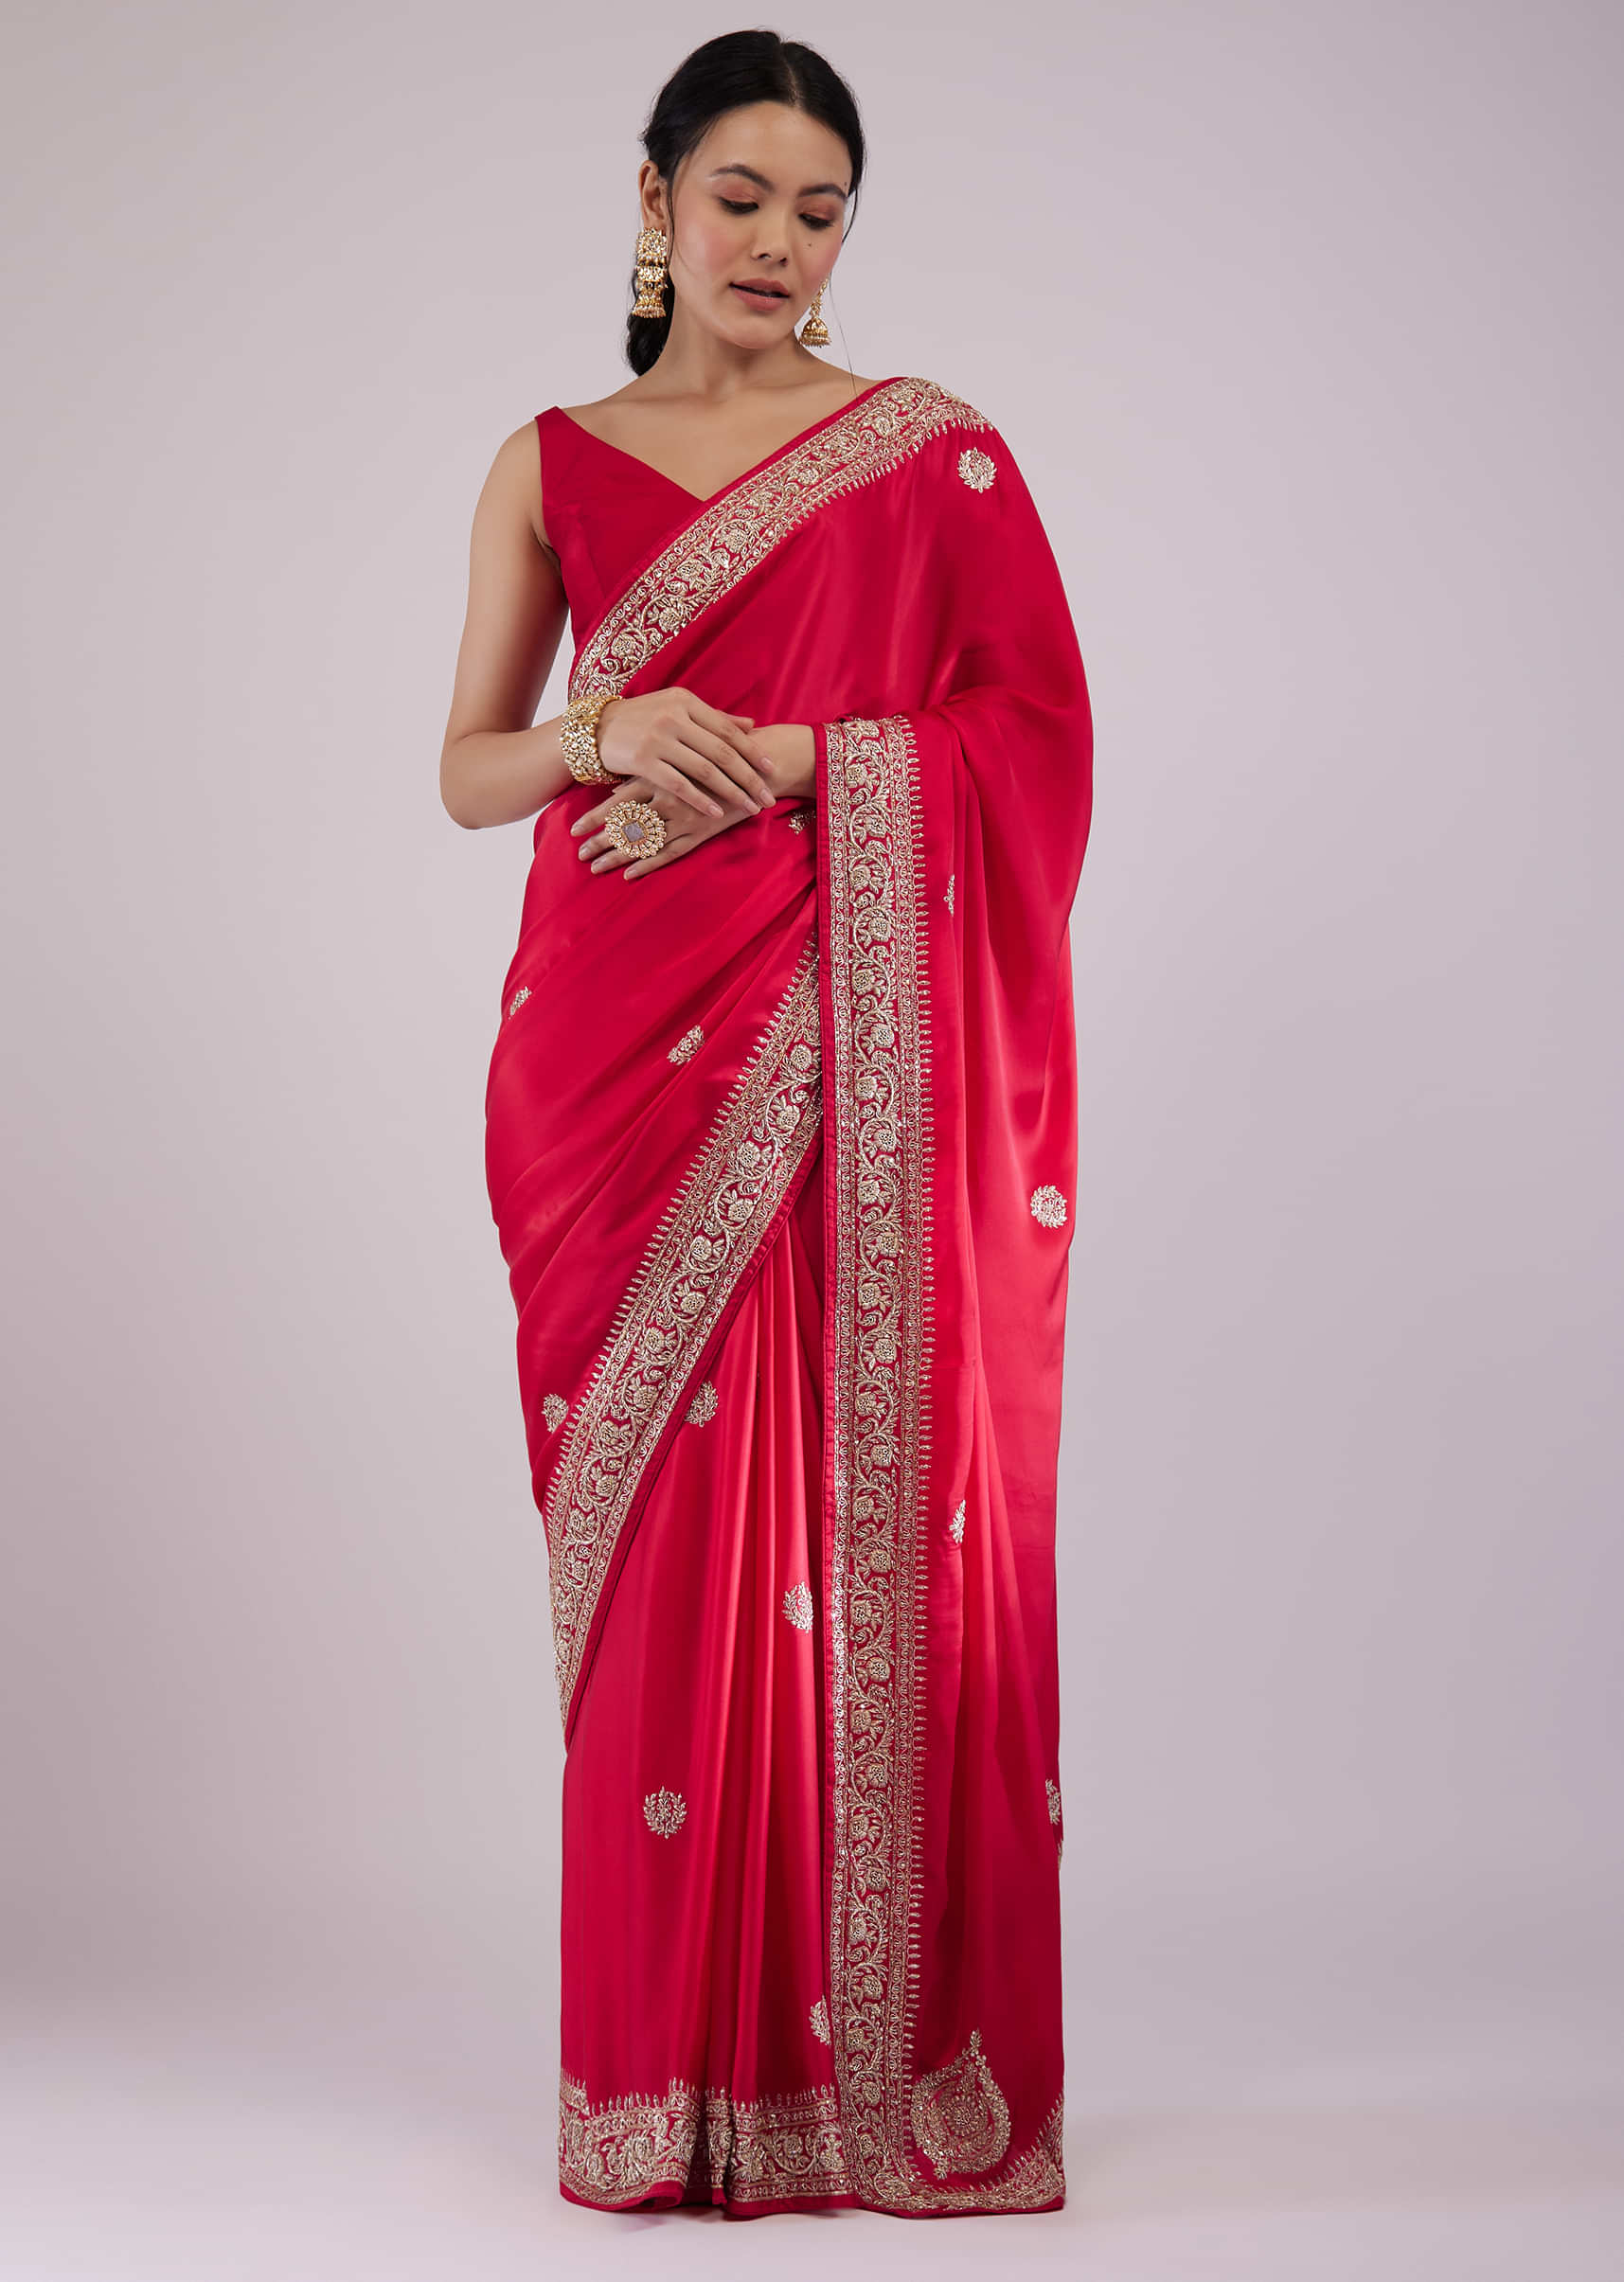 Carmine Red Satin Saree With Embroidery